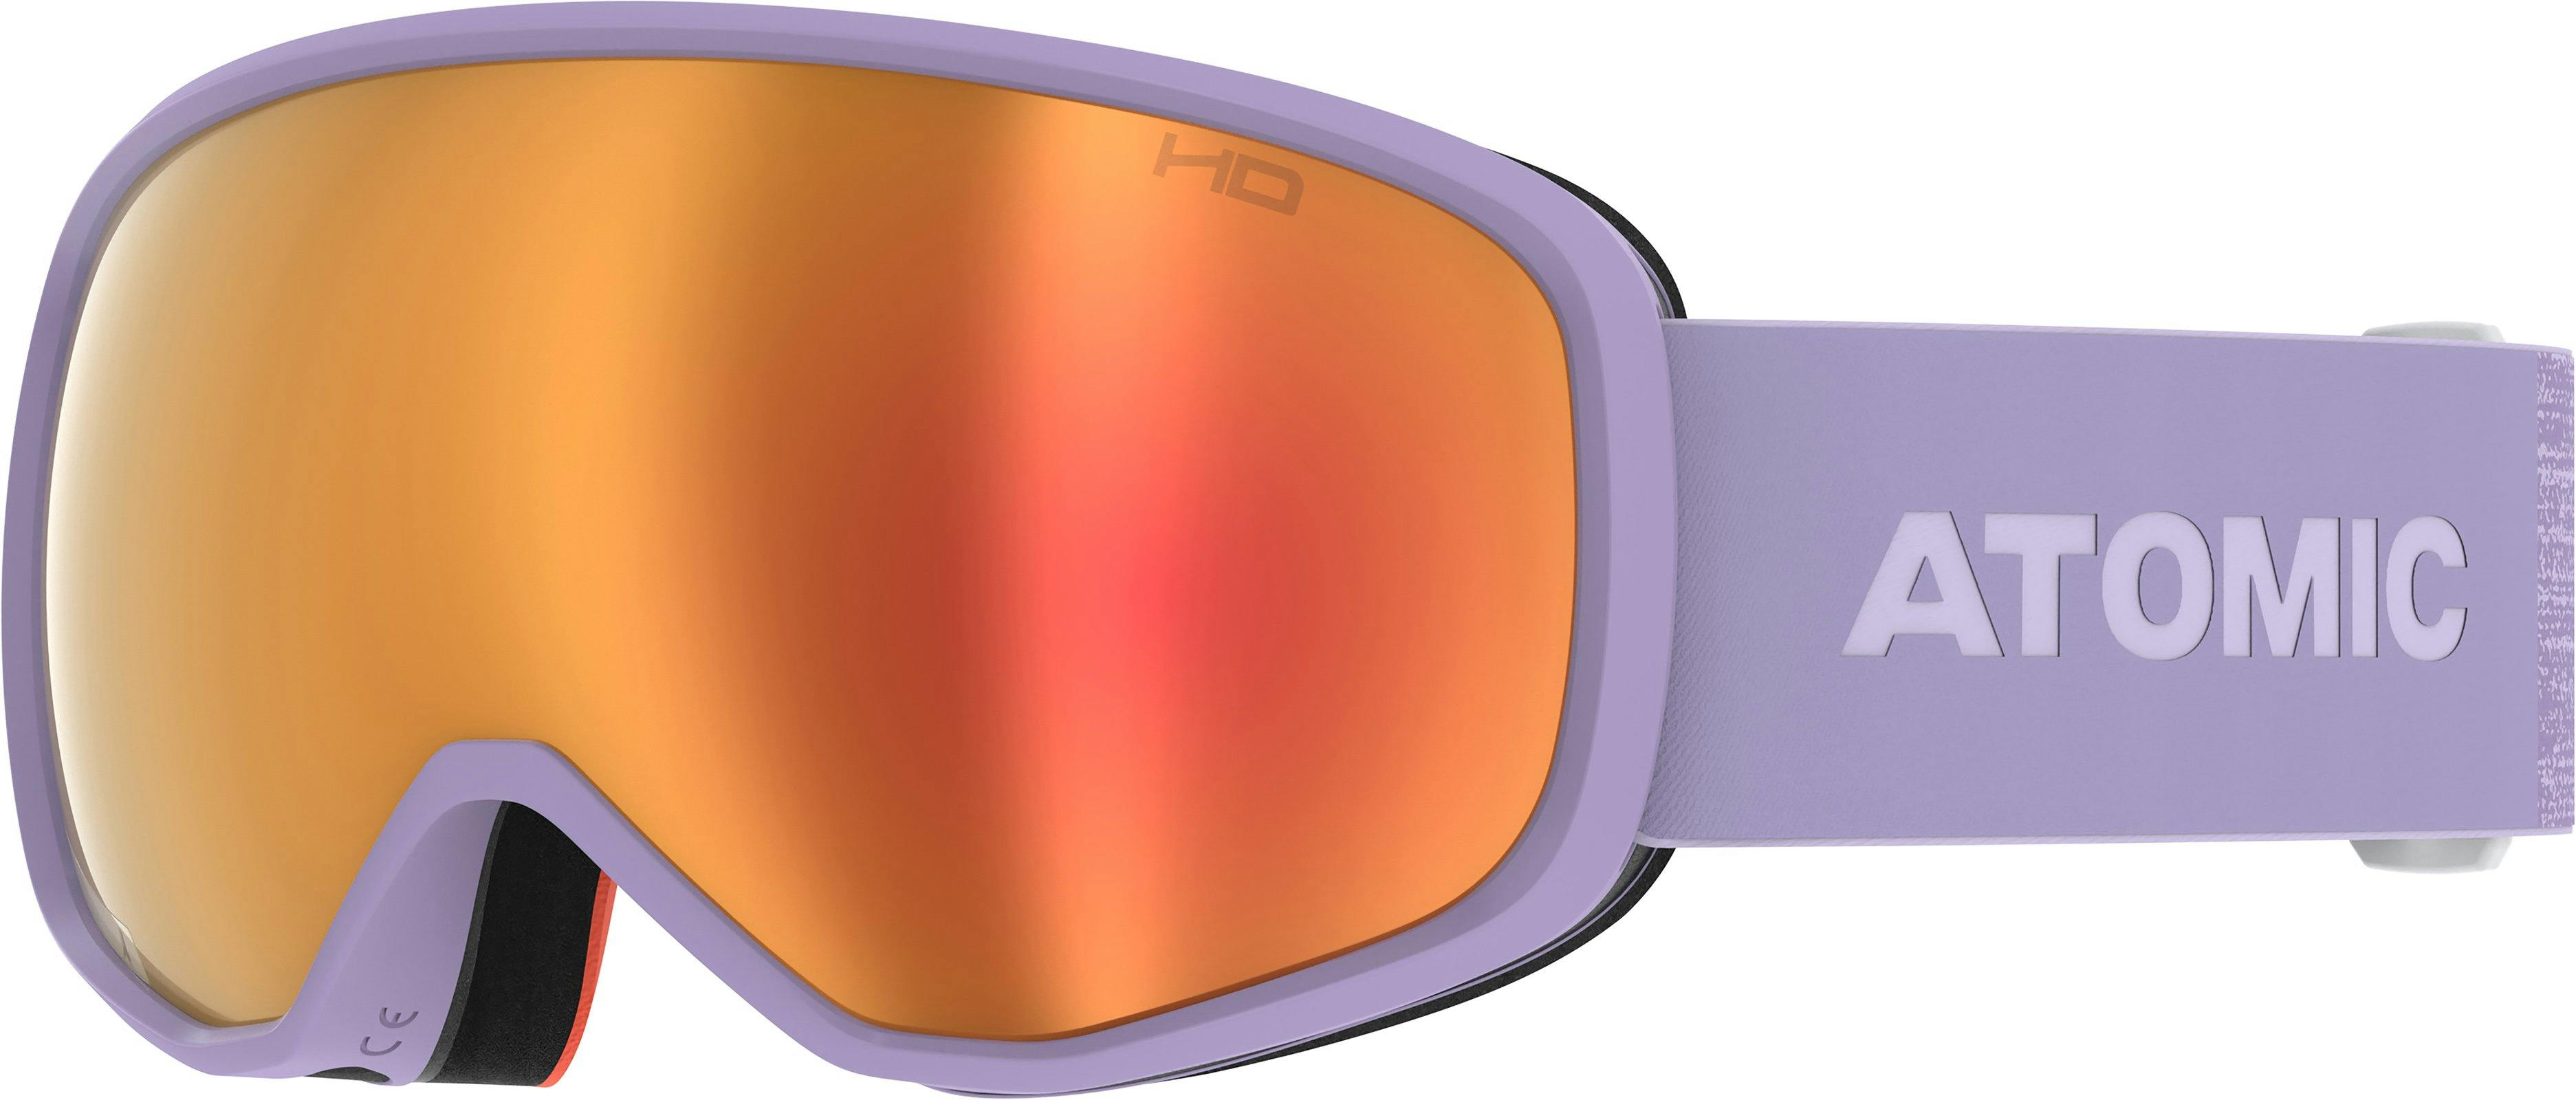 Product image for Revent HD Goggles